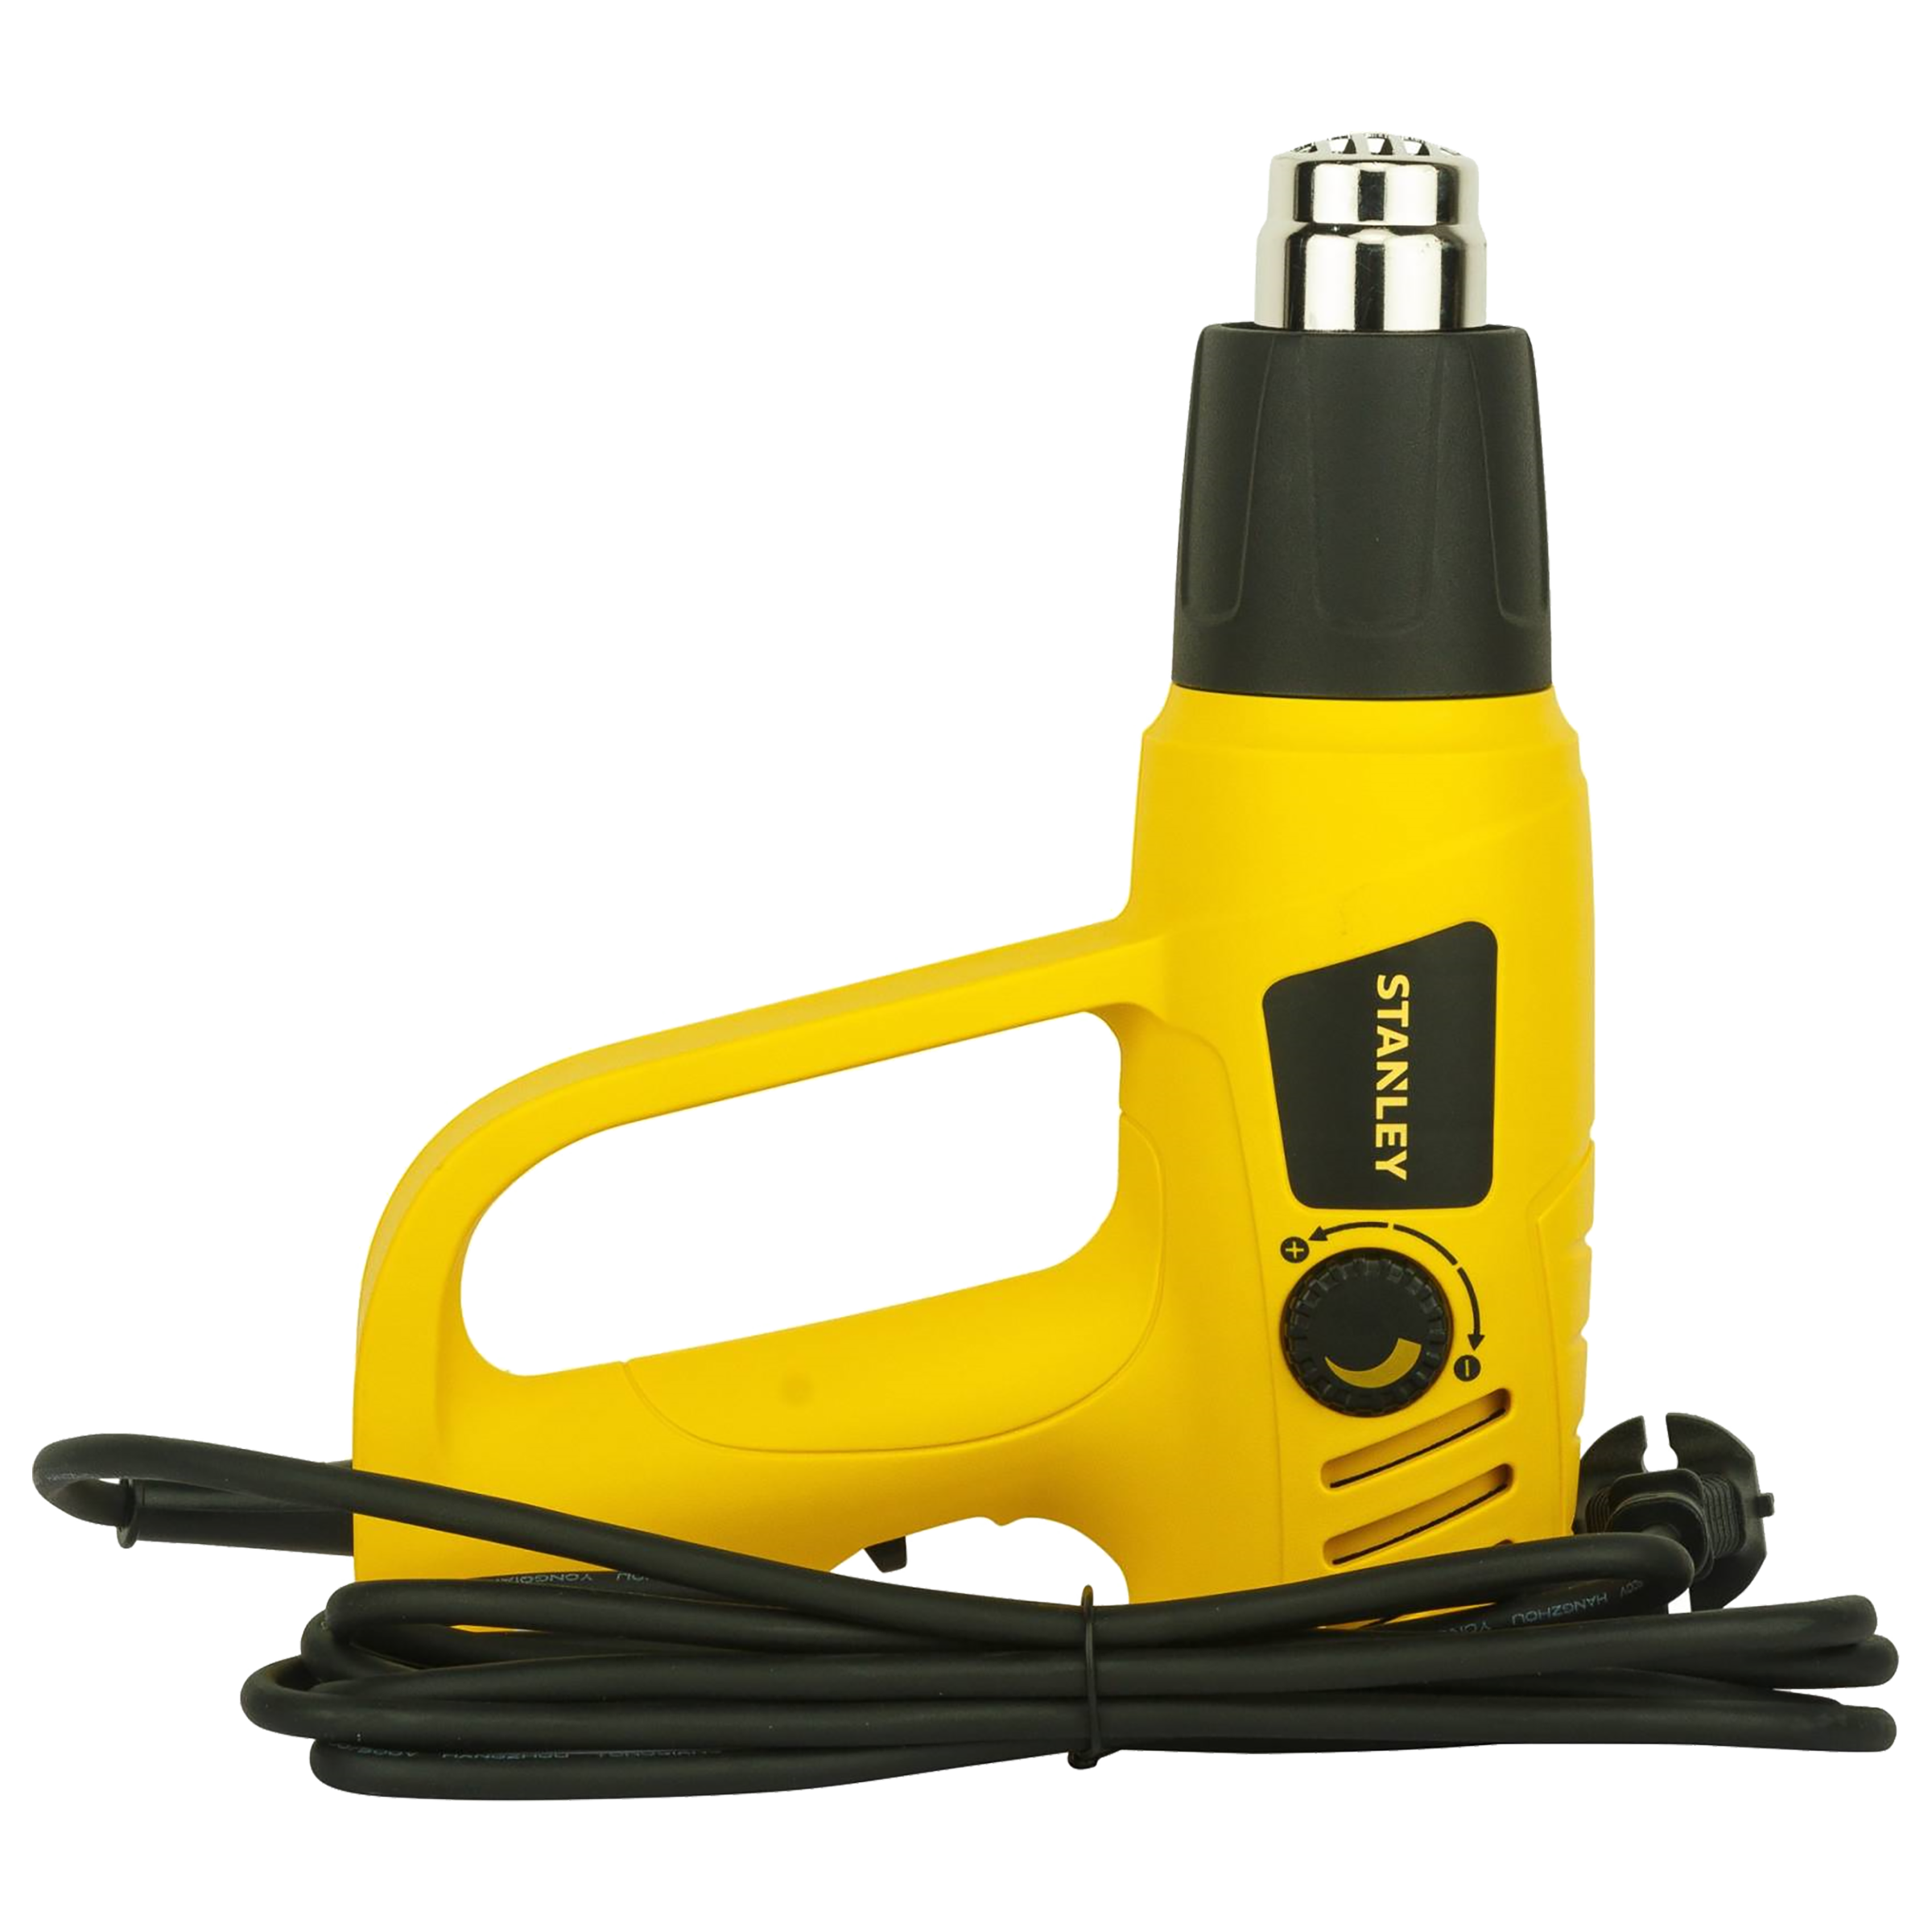 Stanley STXH2000-IN 2000 W Electric Heat Gun (Adjustable Knobs And Switches, Yellow)_1